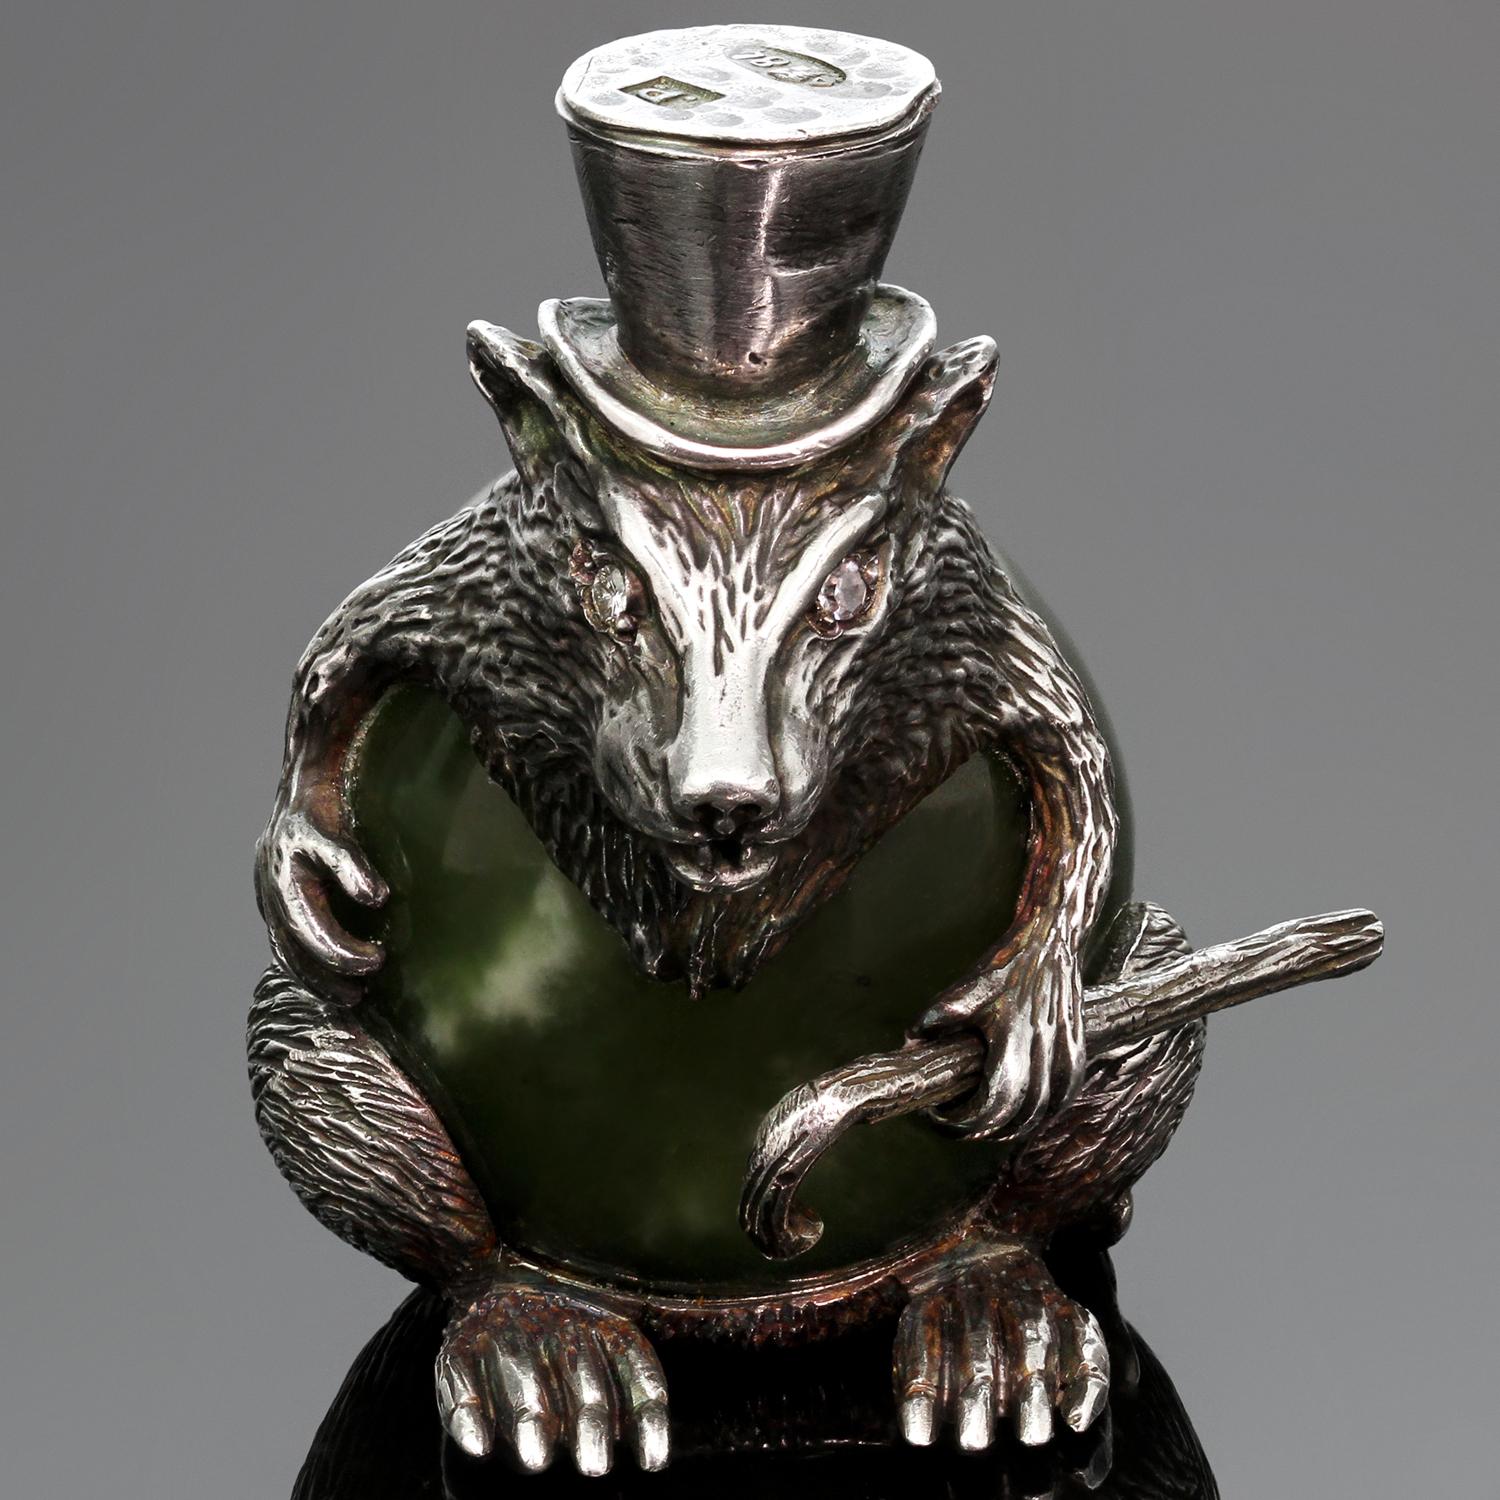 This exquisite Russian Imperial sculpture features a rat in a top hat with a movable cane crafted out of sterling silver and nephrite. The nephrite is medium to medium light muddy green with black inclusions, several white spots, and good luster.